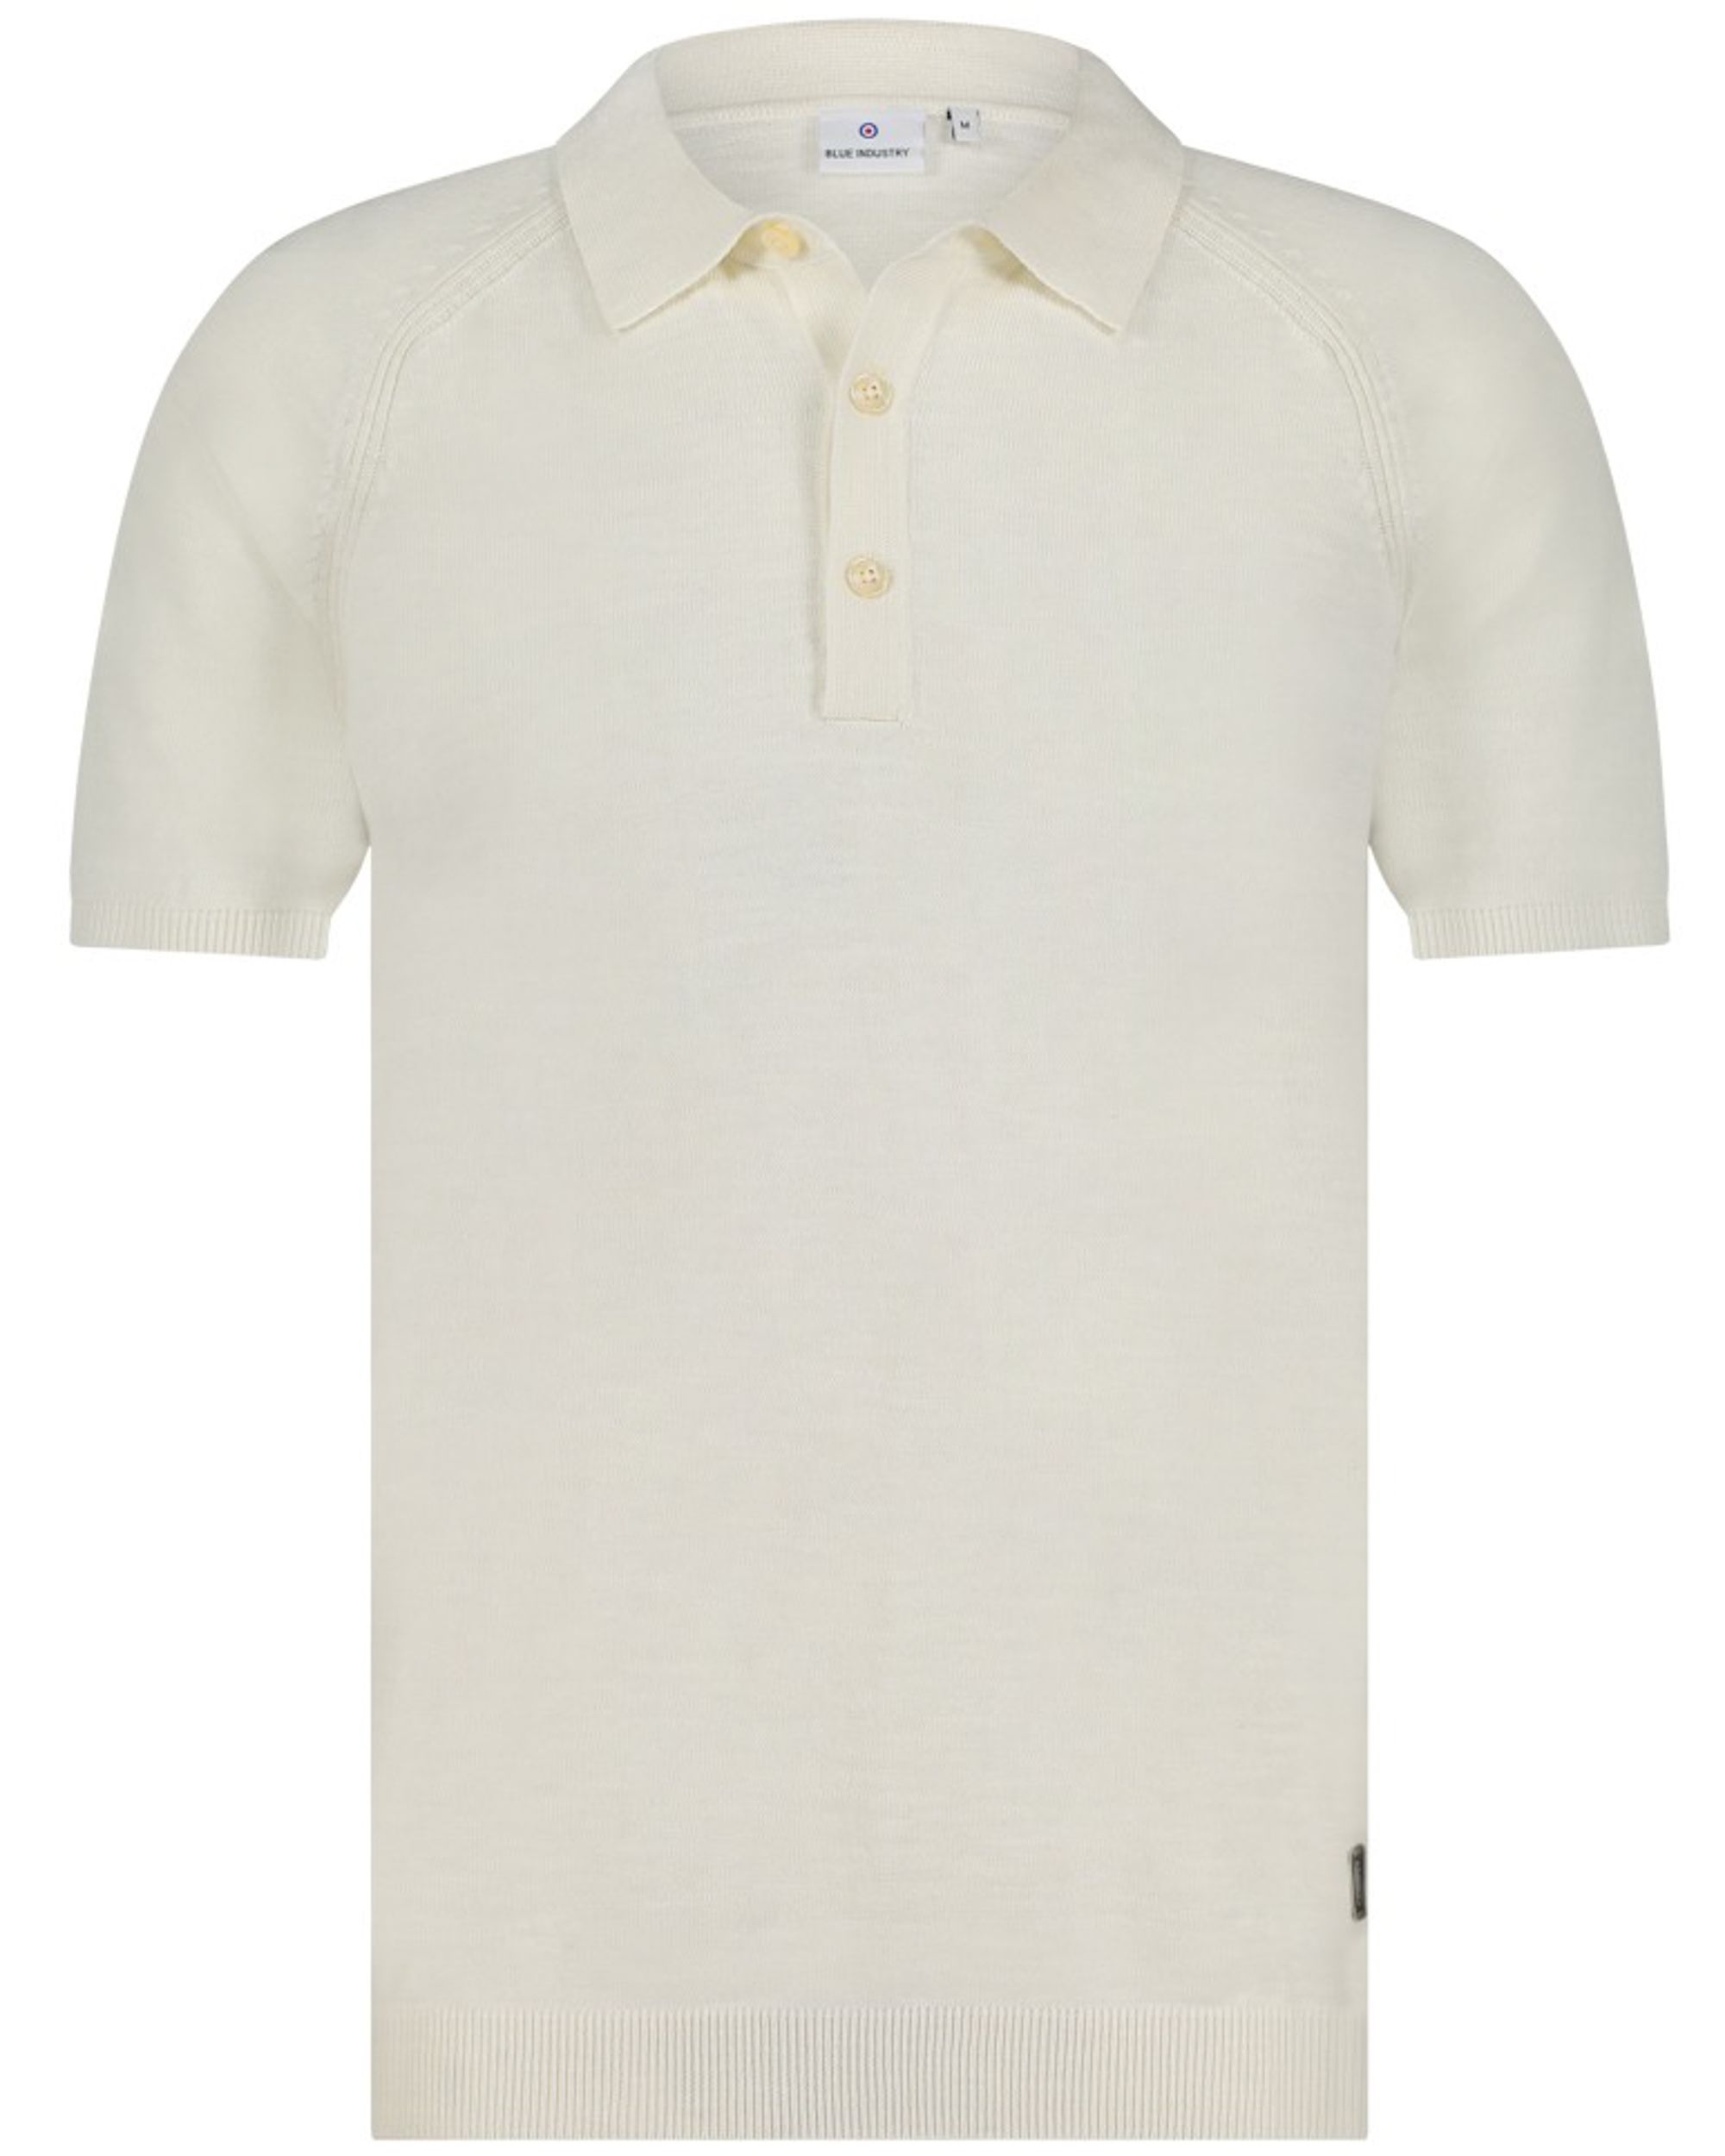 Blue Industry Polo KM Off white 092842-001-L